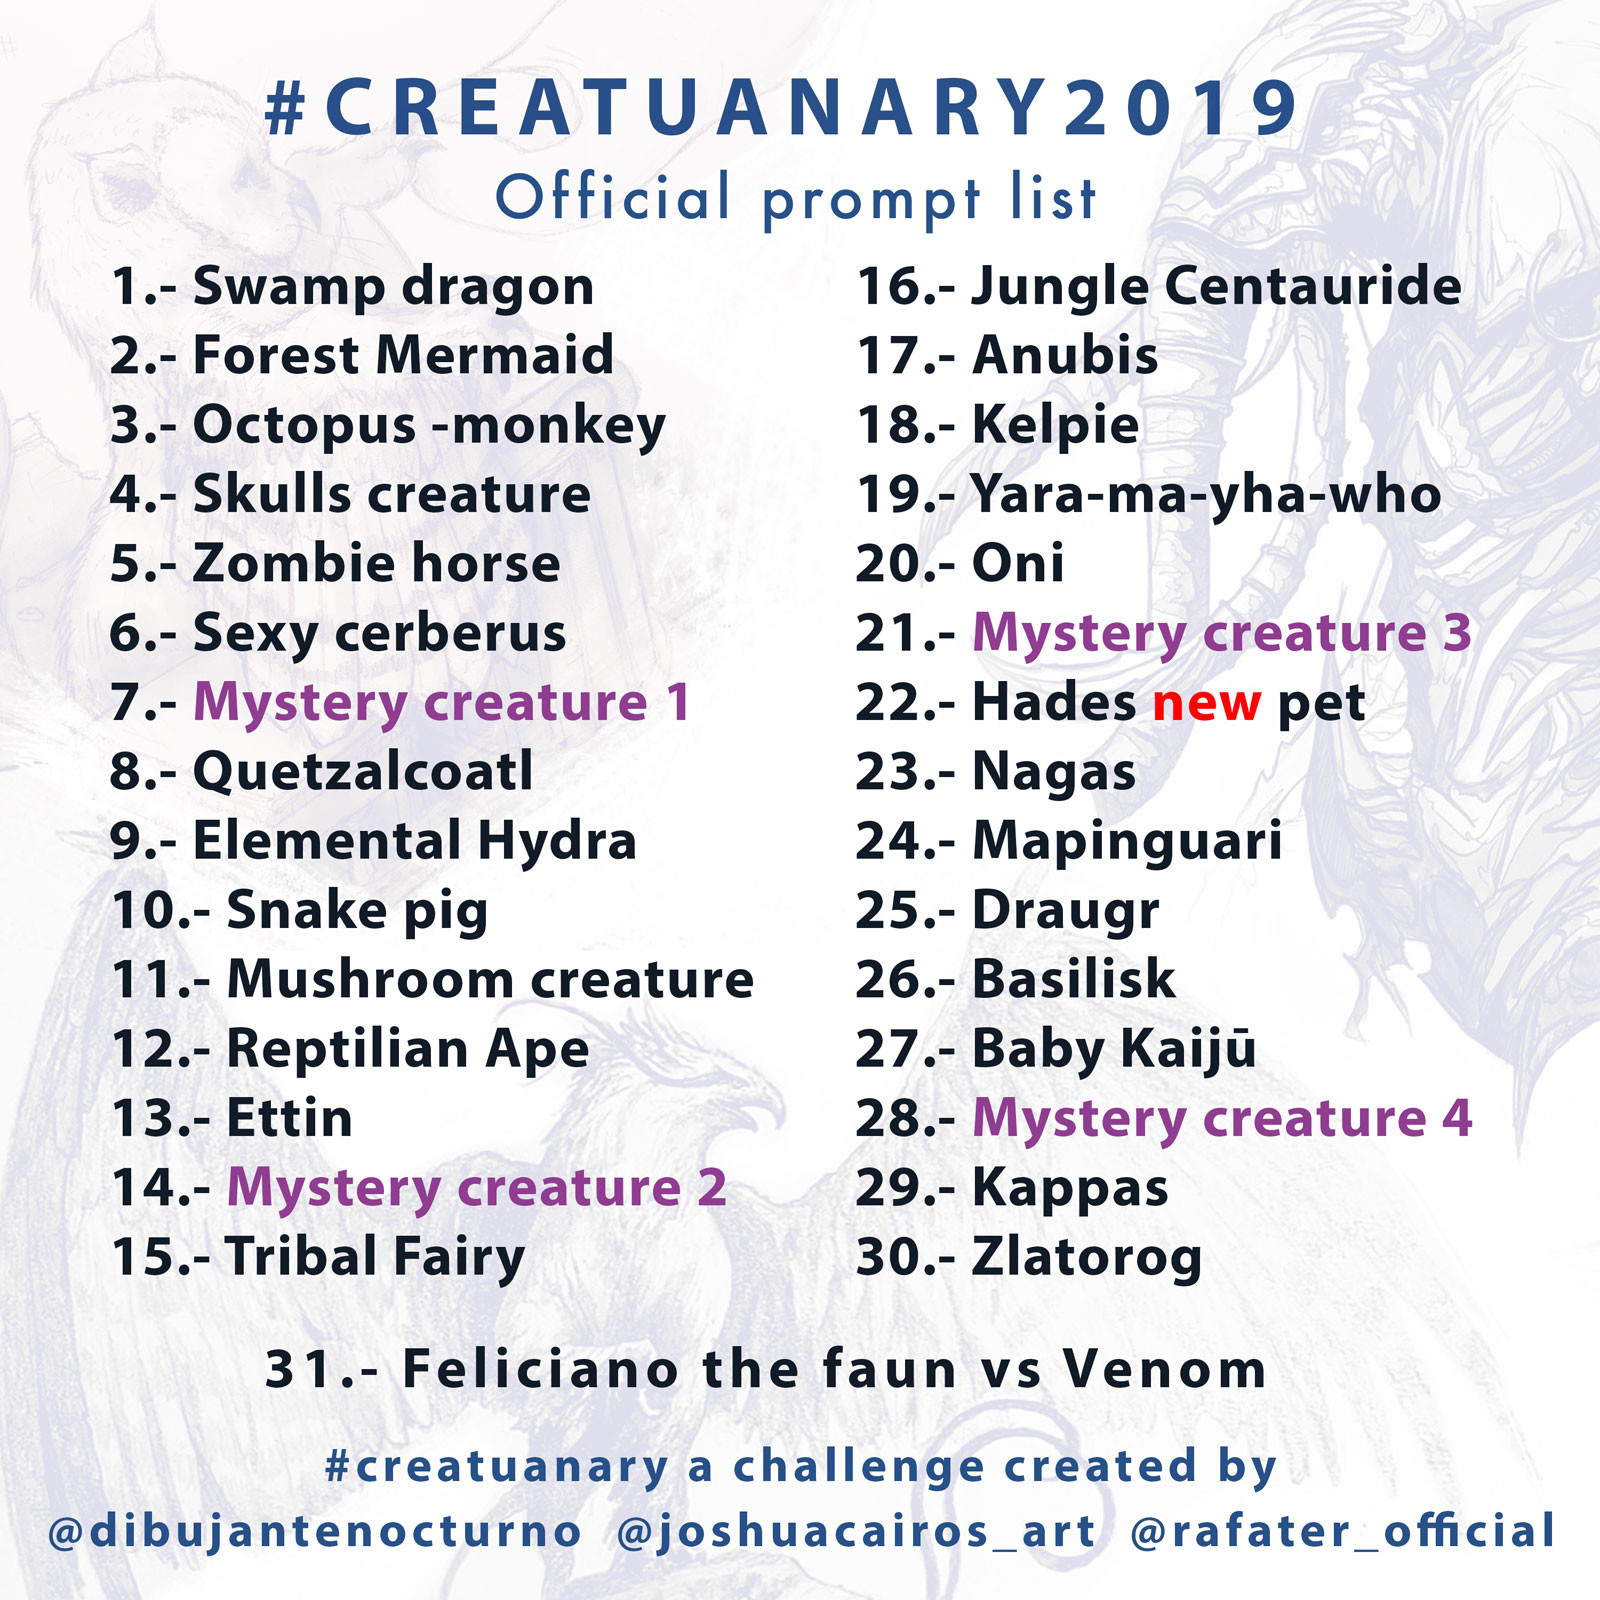 Creatuanary 2019 - Official prompt list